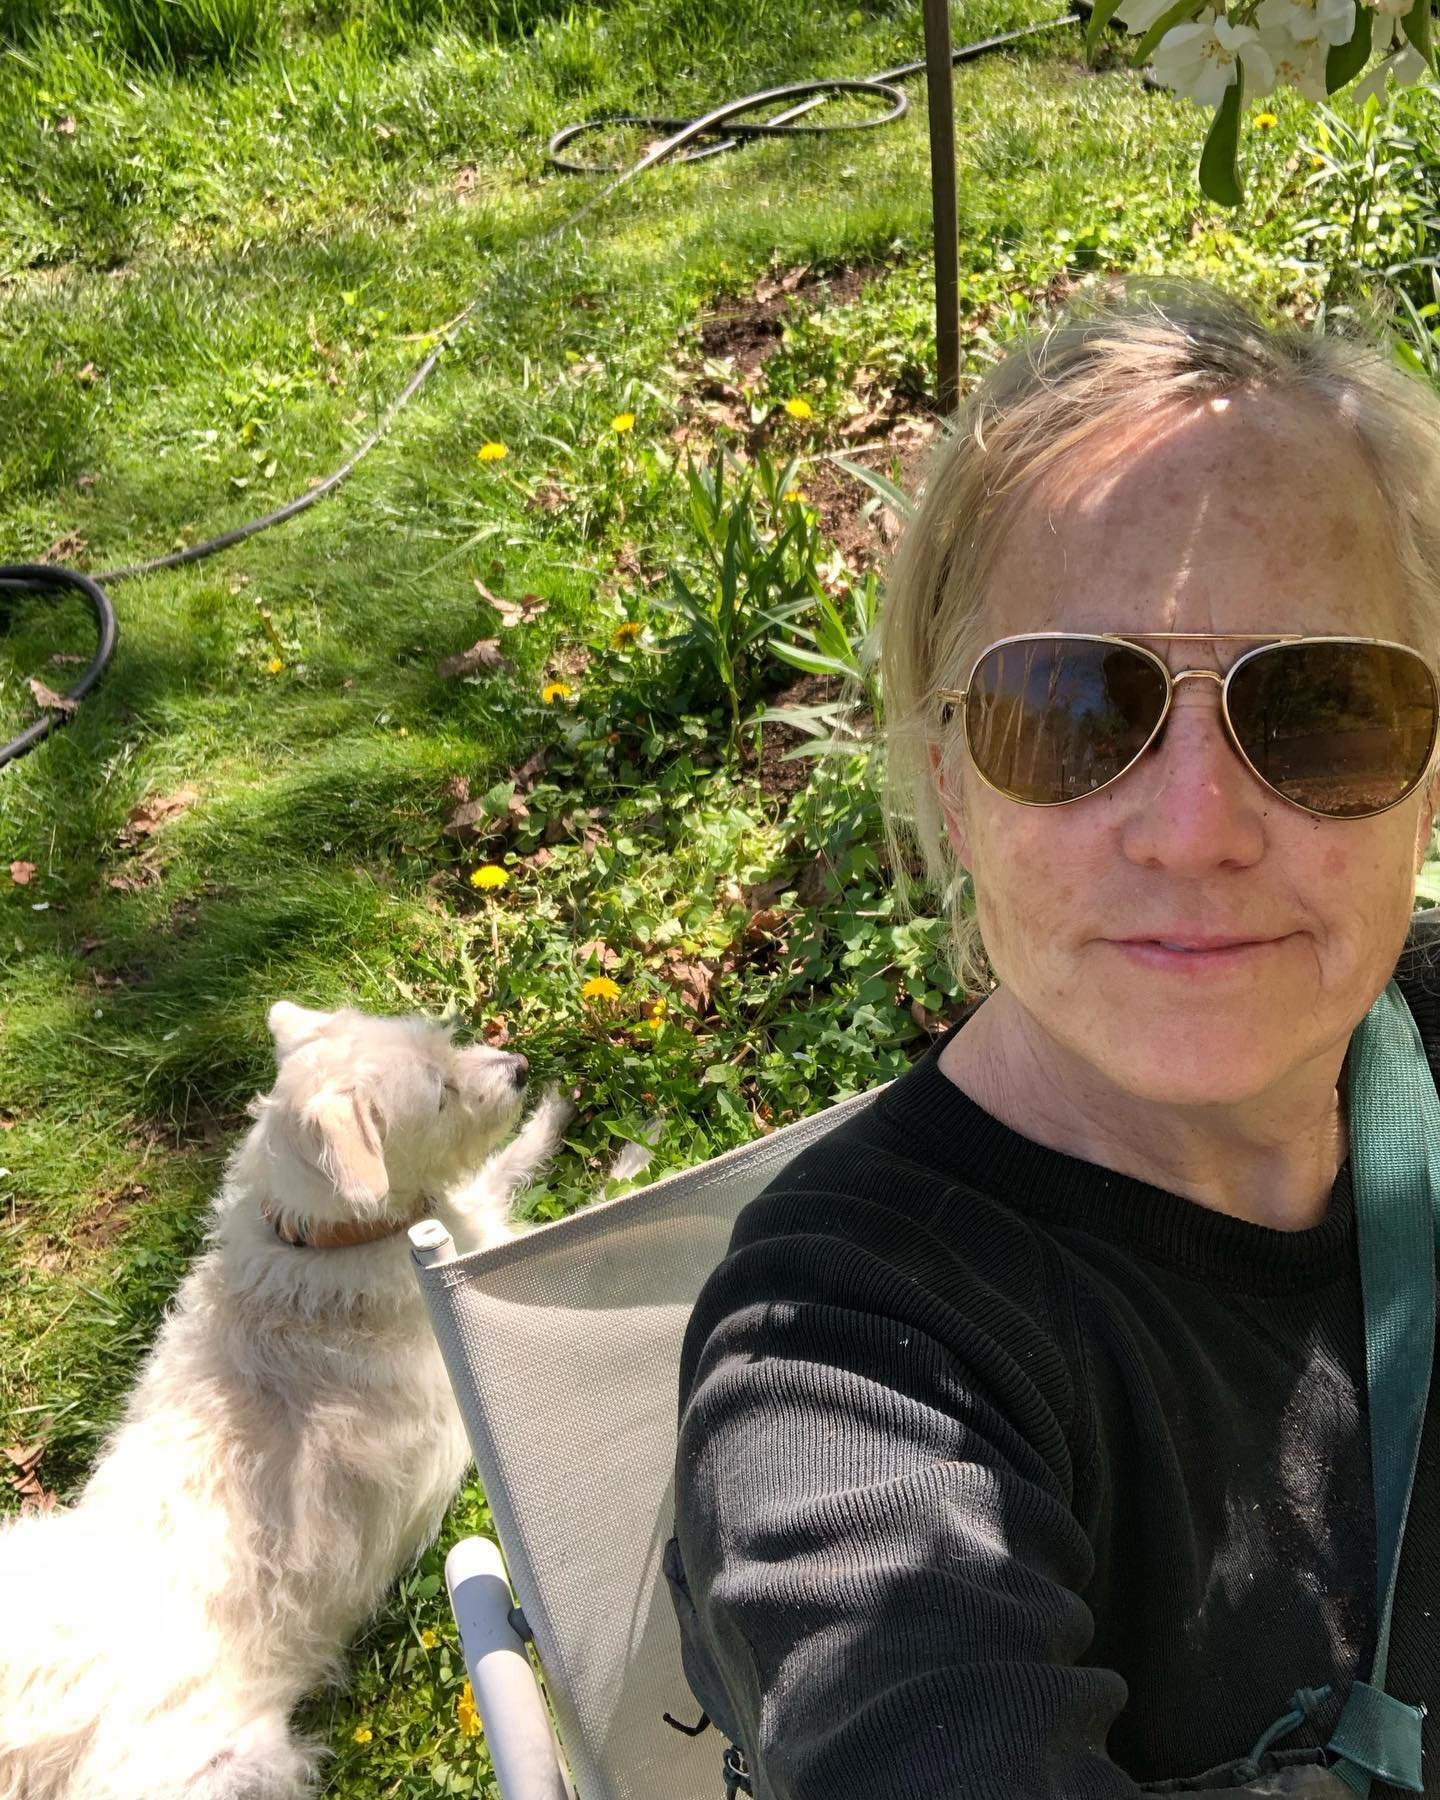 me and louie taking a garden break on this incredibly beautiful morning ☀️ me also noticing all the sun spots reappearing after a rigorous face routine all winter 🤸🤸🤸🤸 I&rsquo;ve decided to age in the garden ☀️☀️☀️